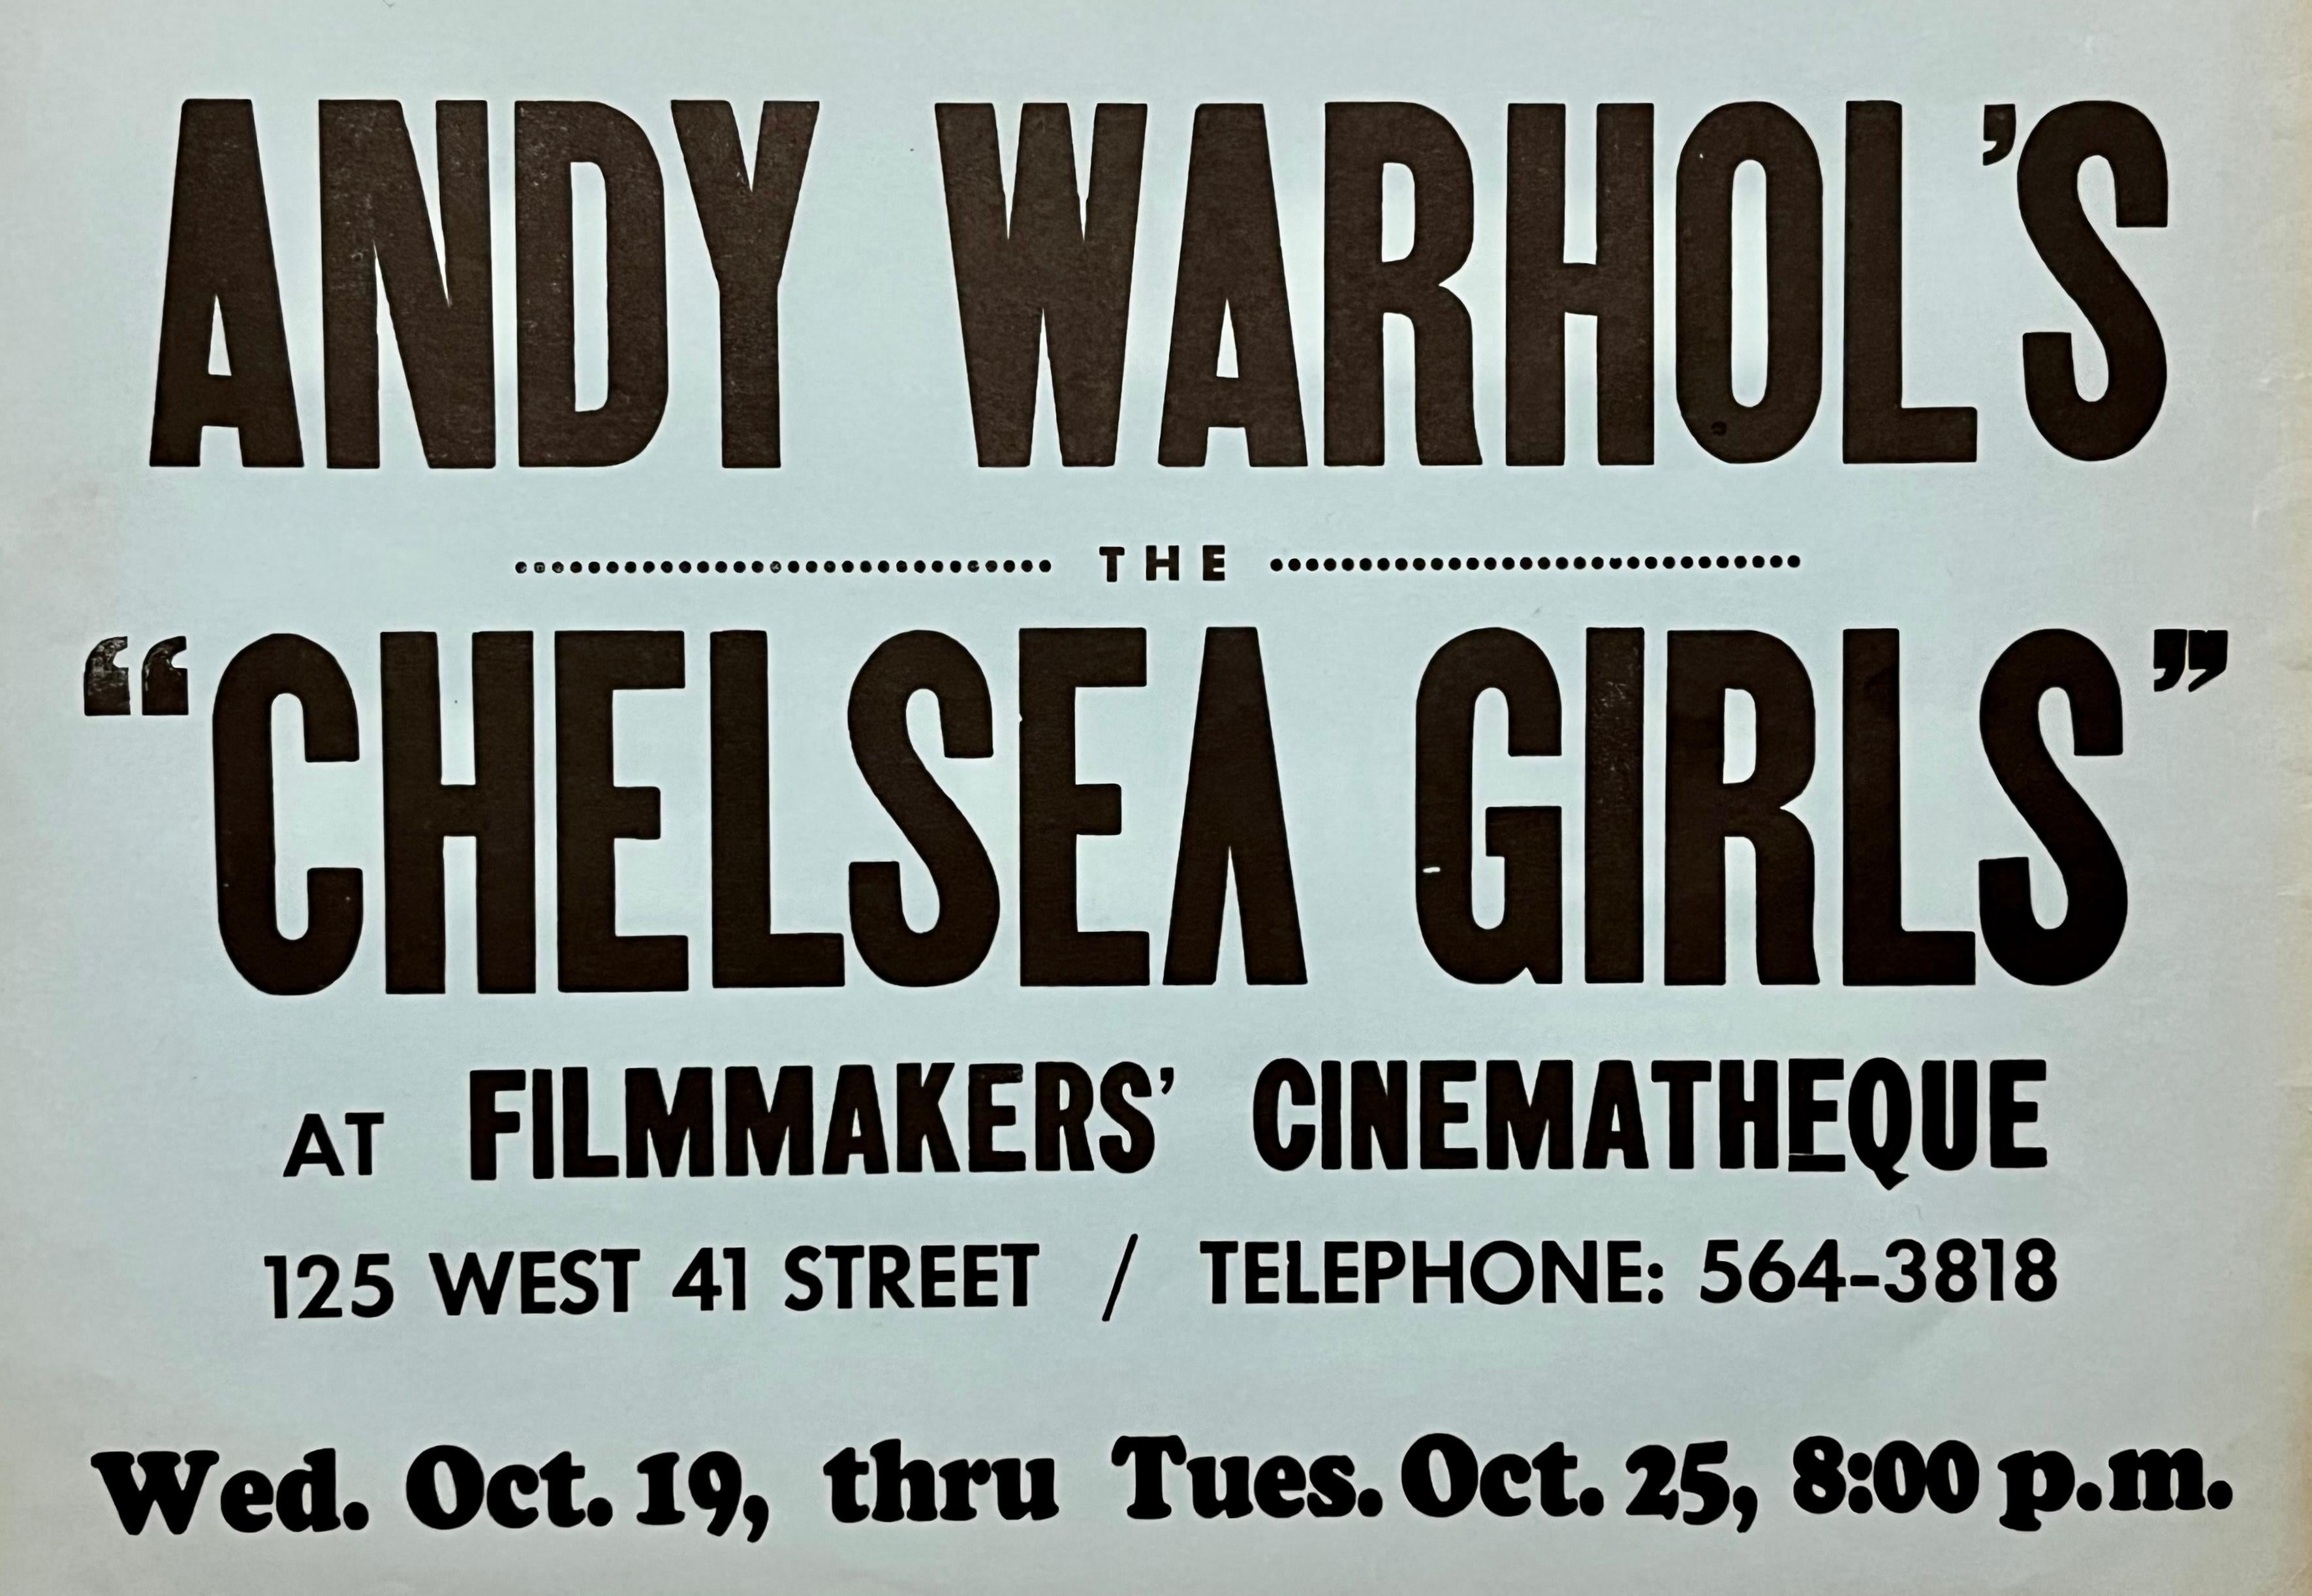 Andy Warhol Chelsea Girls 1966 (announcement)